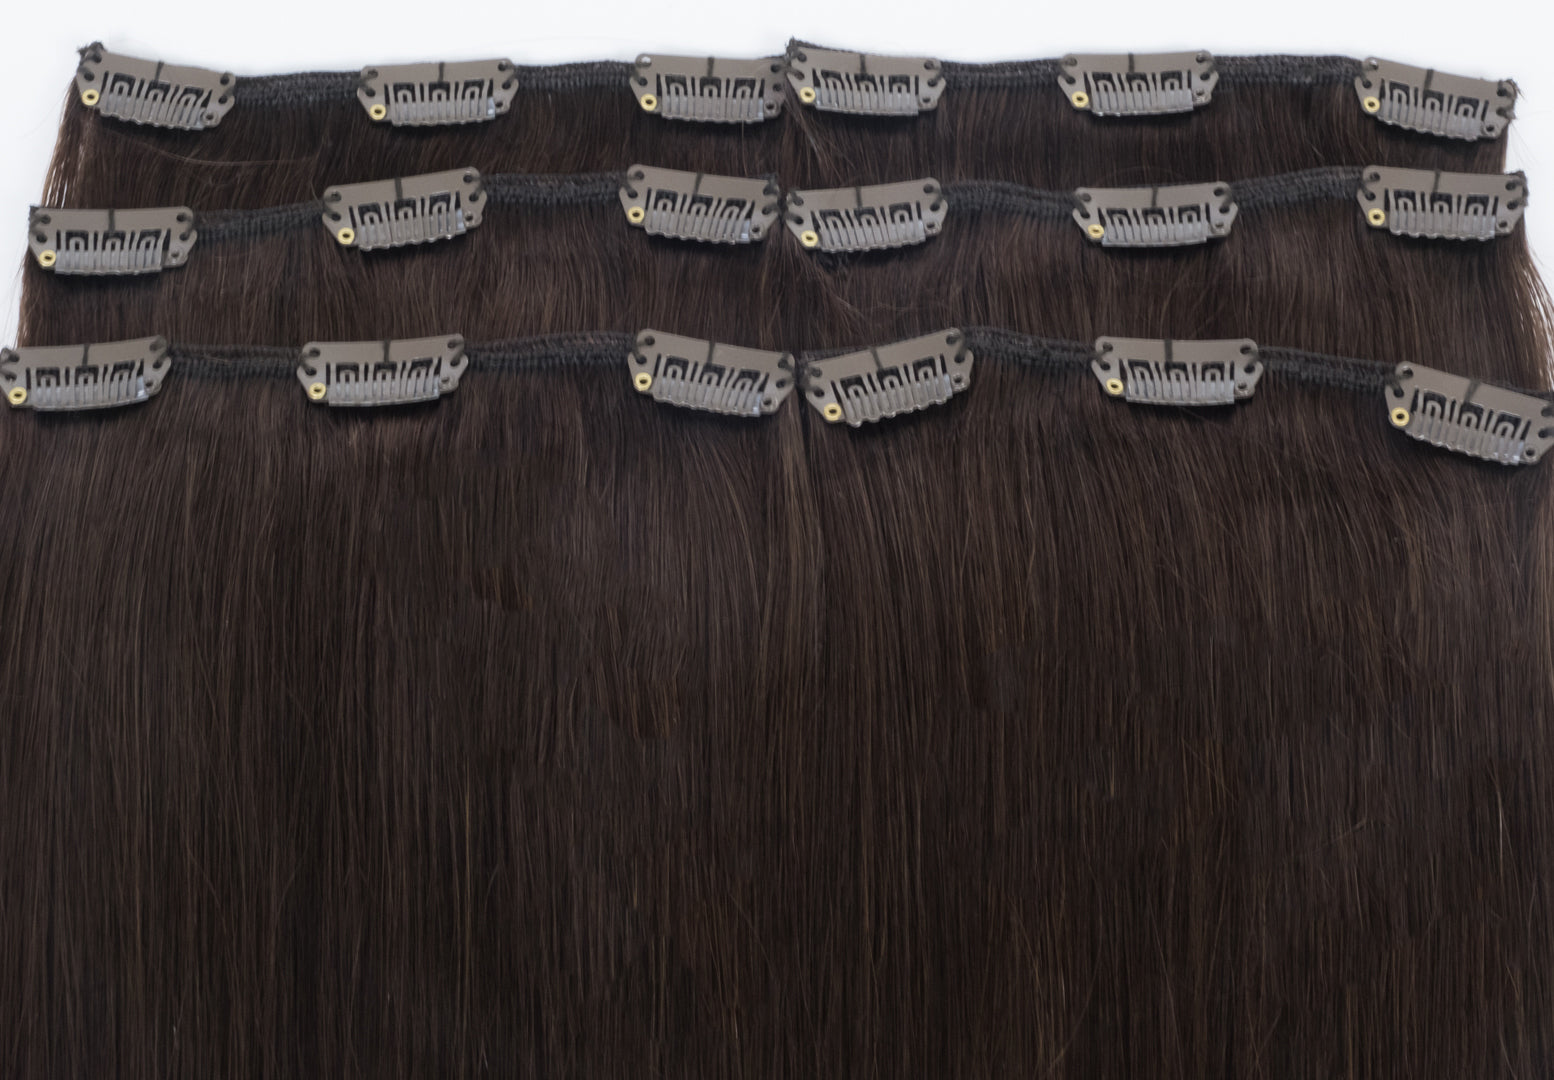 22" Clip In Hair Extensions Deluxe Box ($398.00 - $438.00)